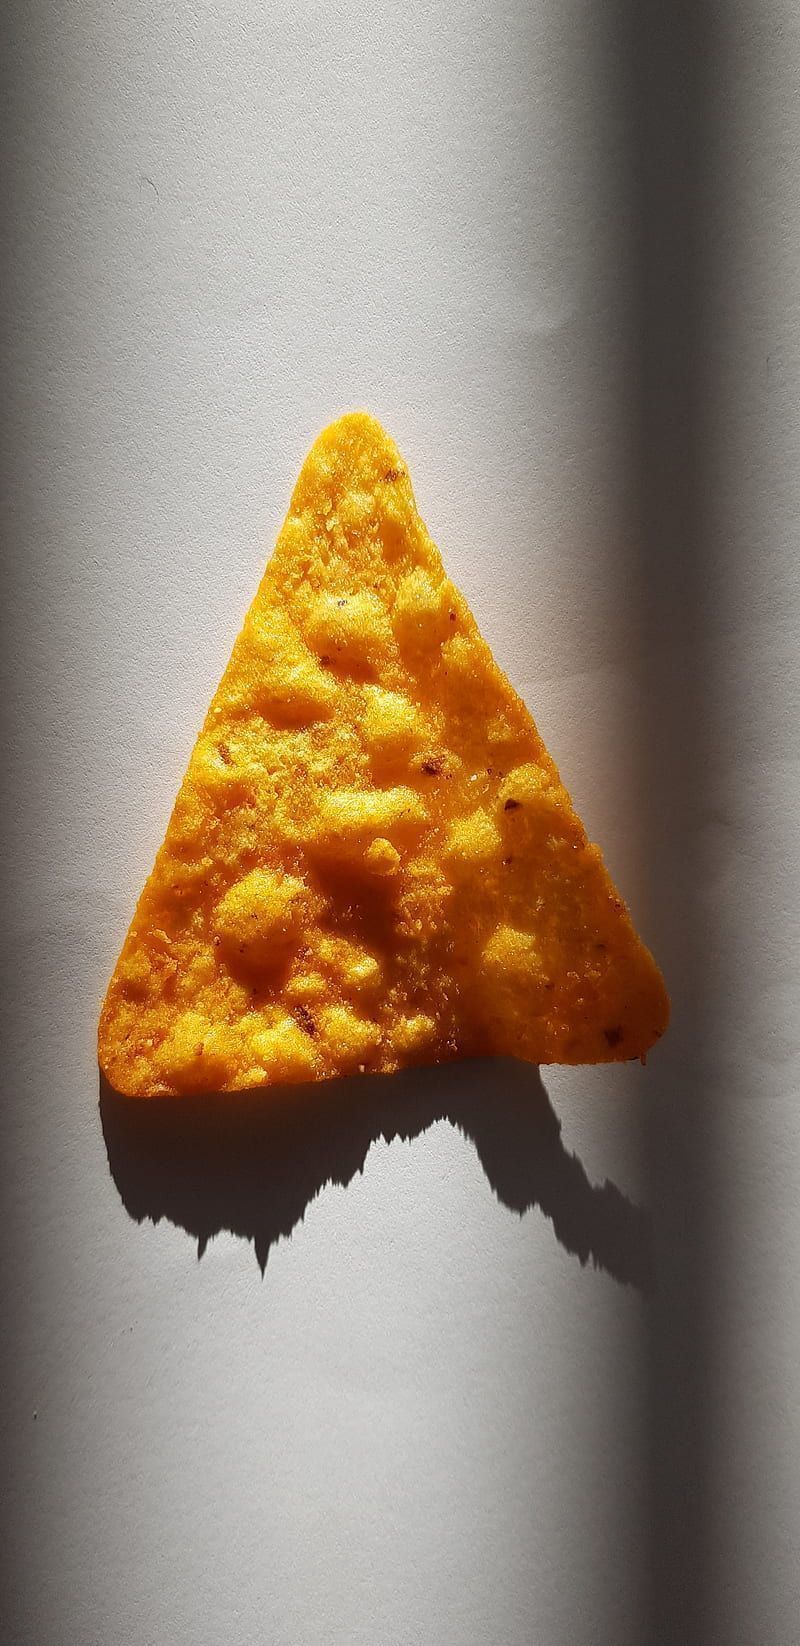 A single corn chip on a white background with a shadow - Doritos